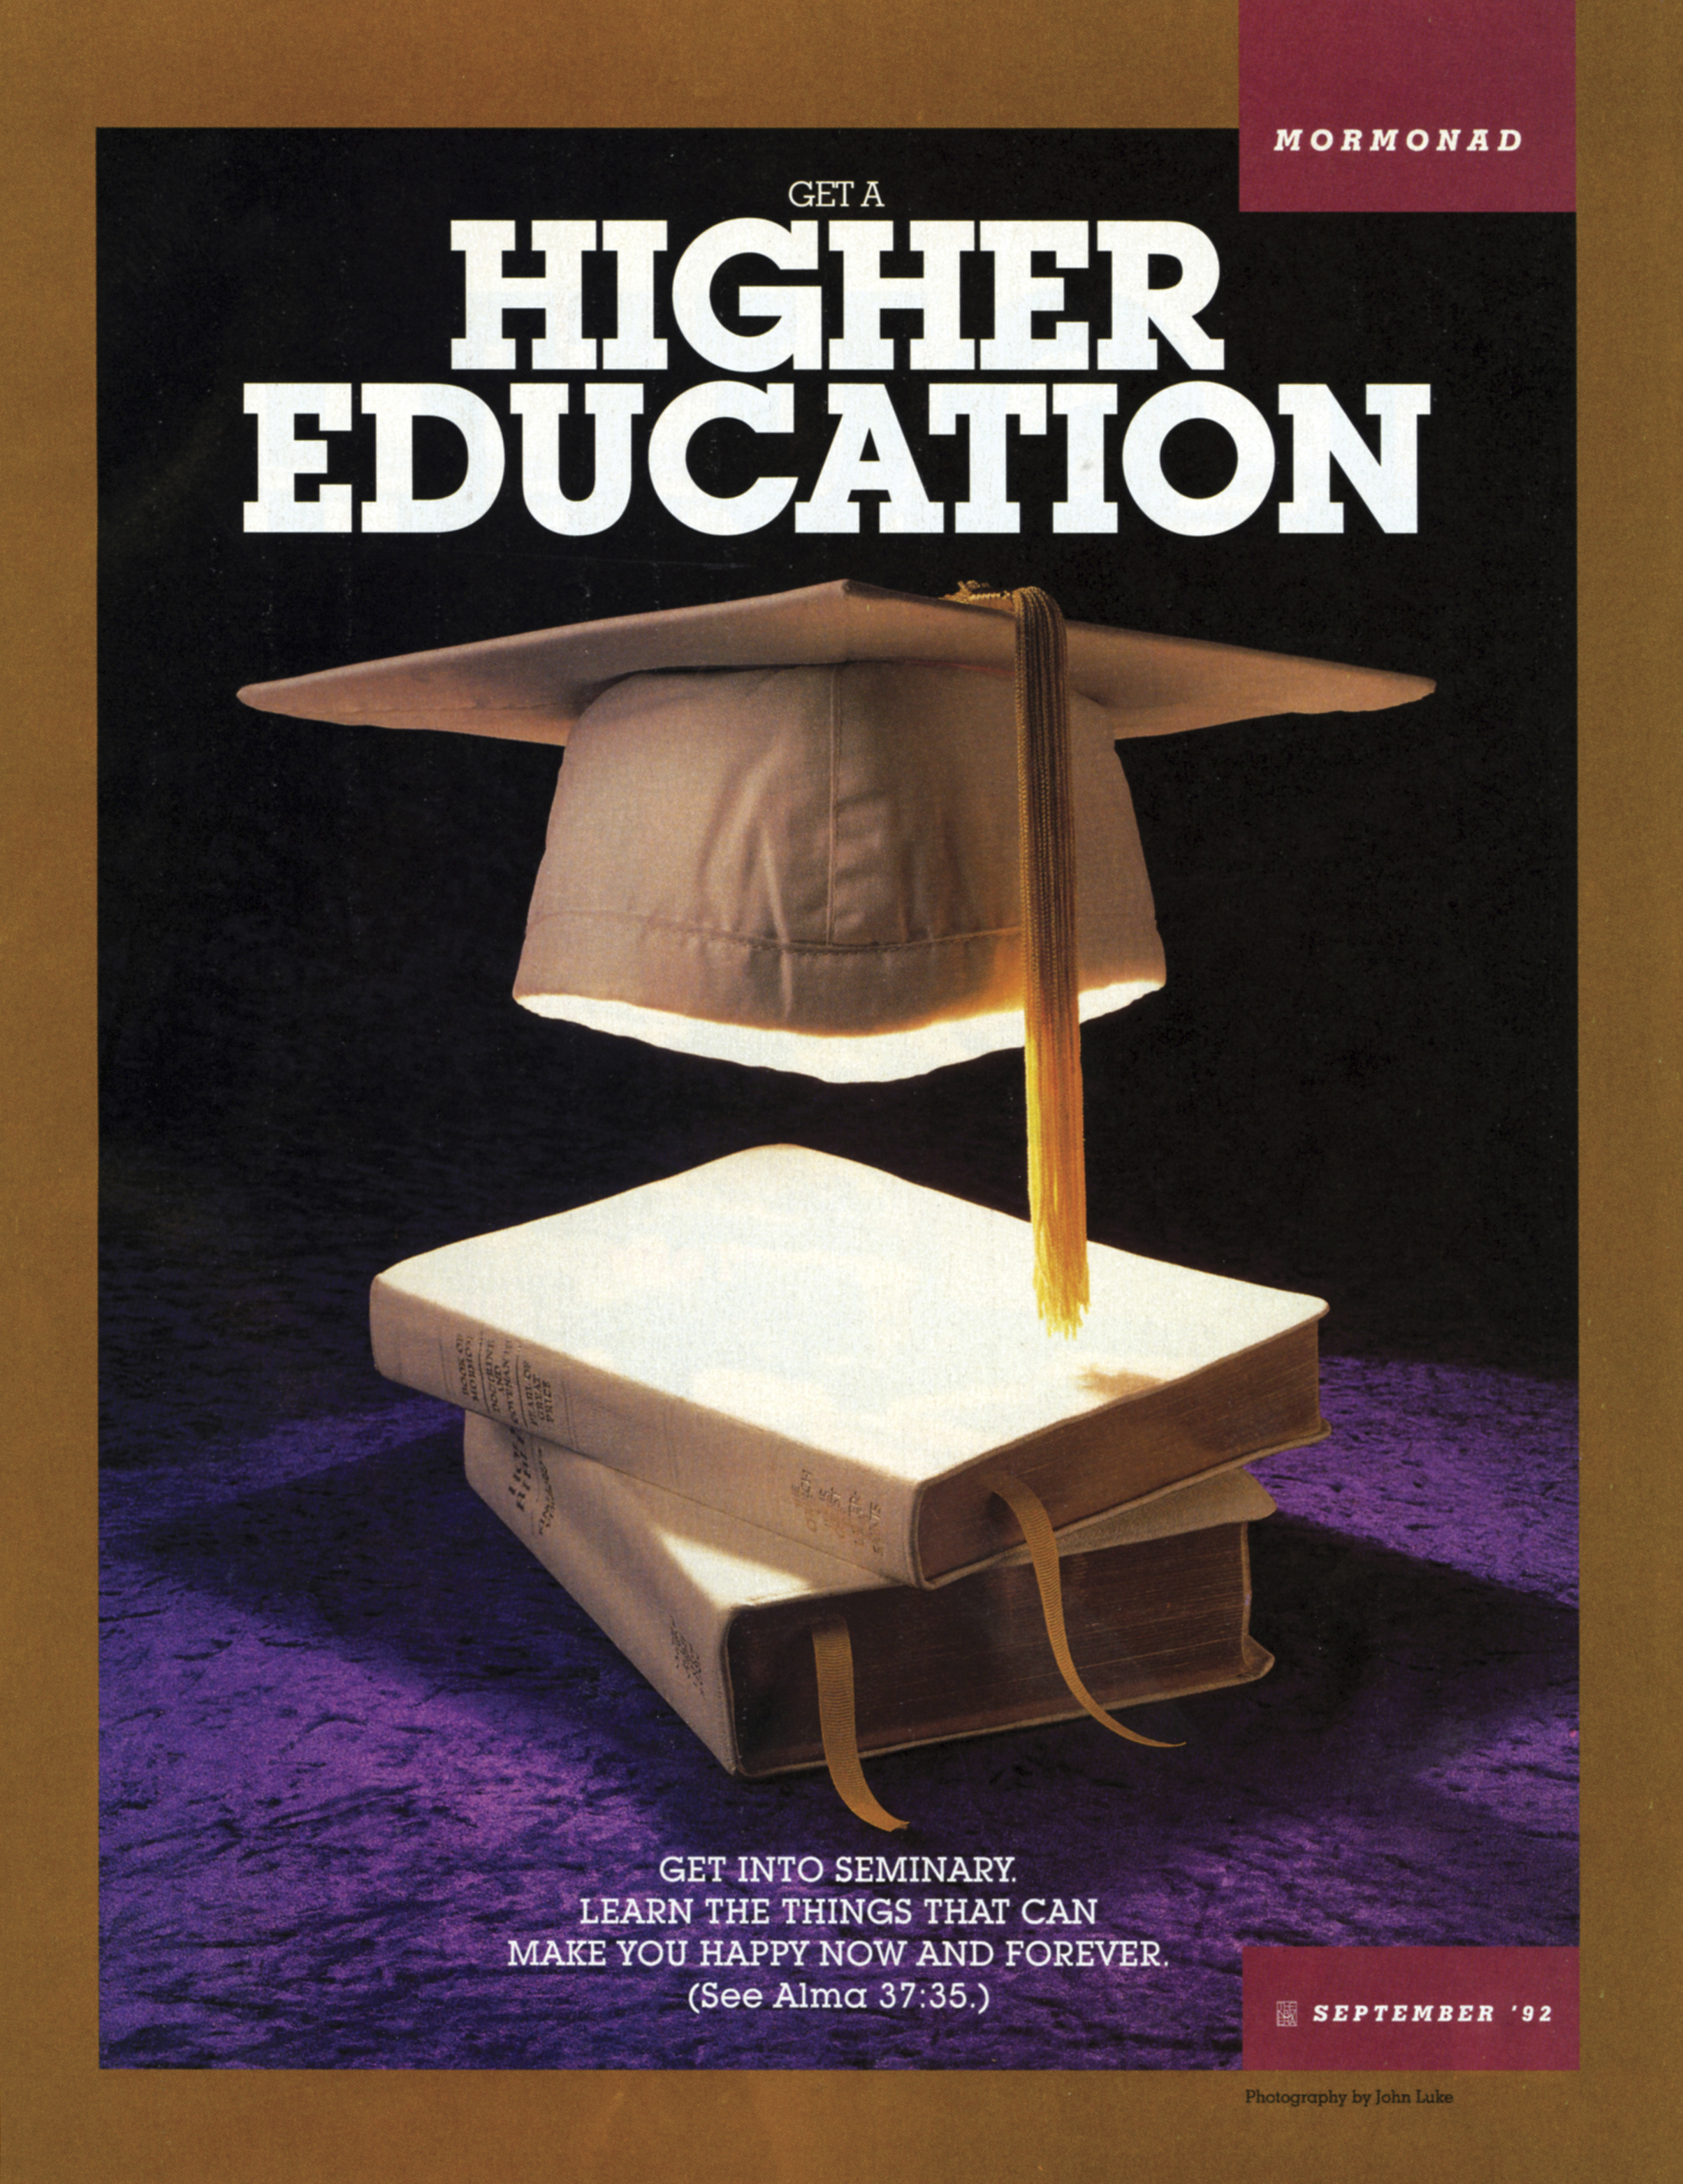 Get a Higher Education. Get into seminary. Learn the things that can make you happy now and forever. (See Alma 37:35.) Sept. 1992 © undefined ipCode 1.